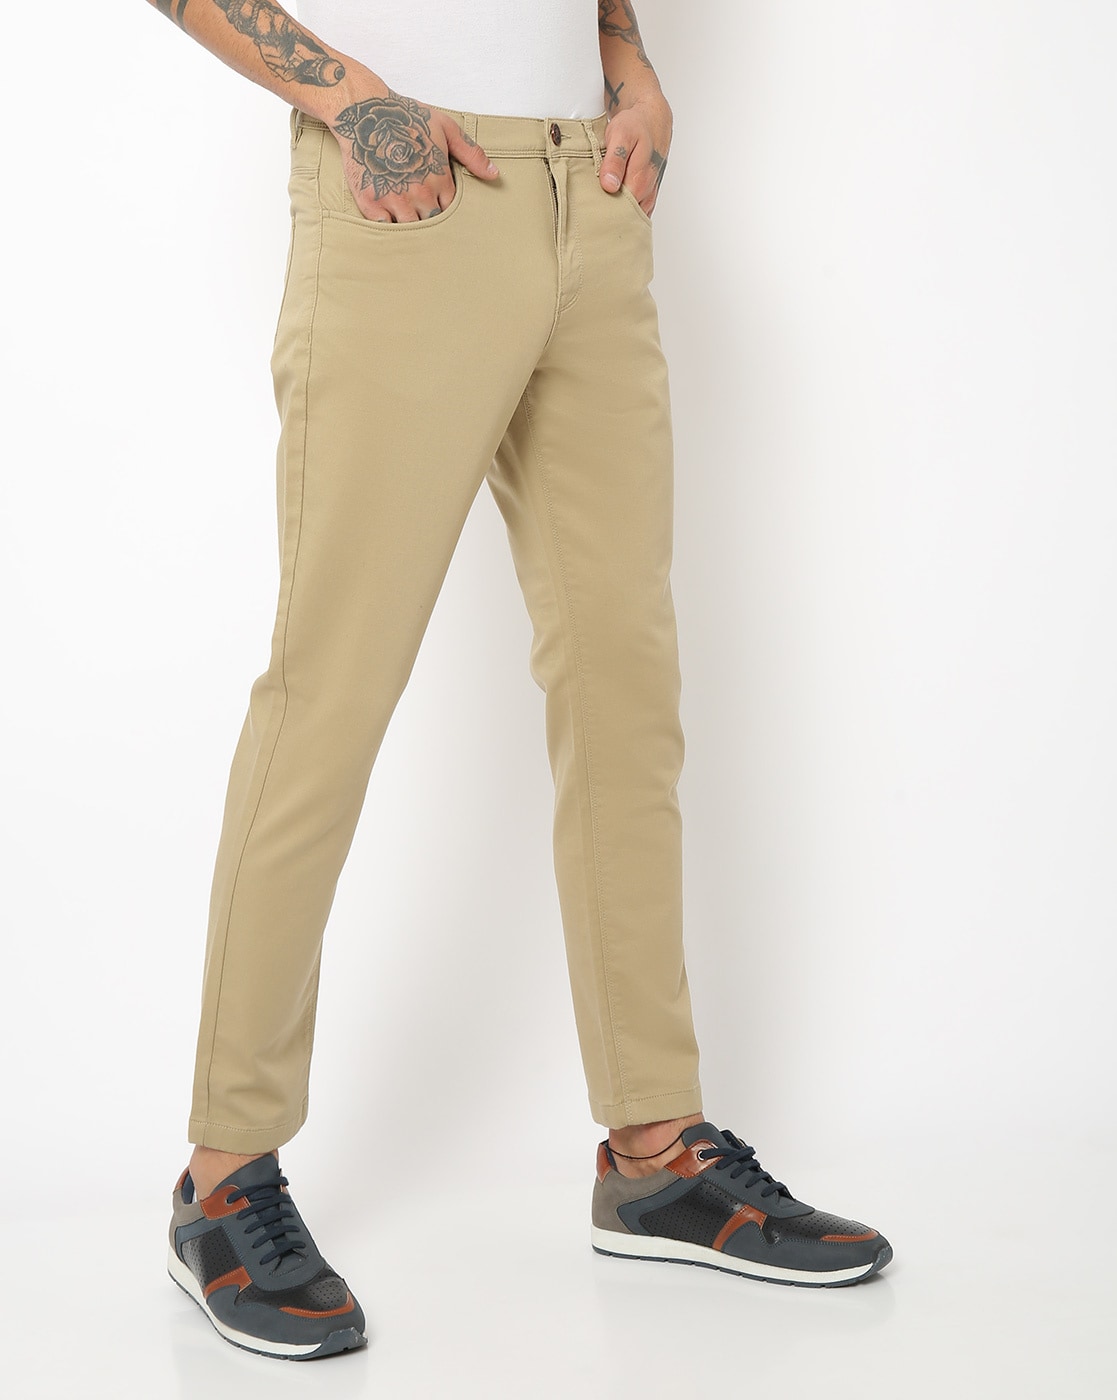 Buy Stone beige Trousers  Pants for Men by CLUB CHINO Online  Ajiocom